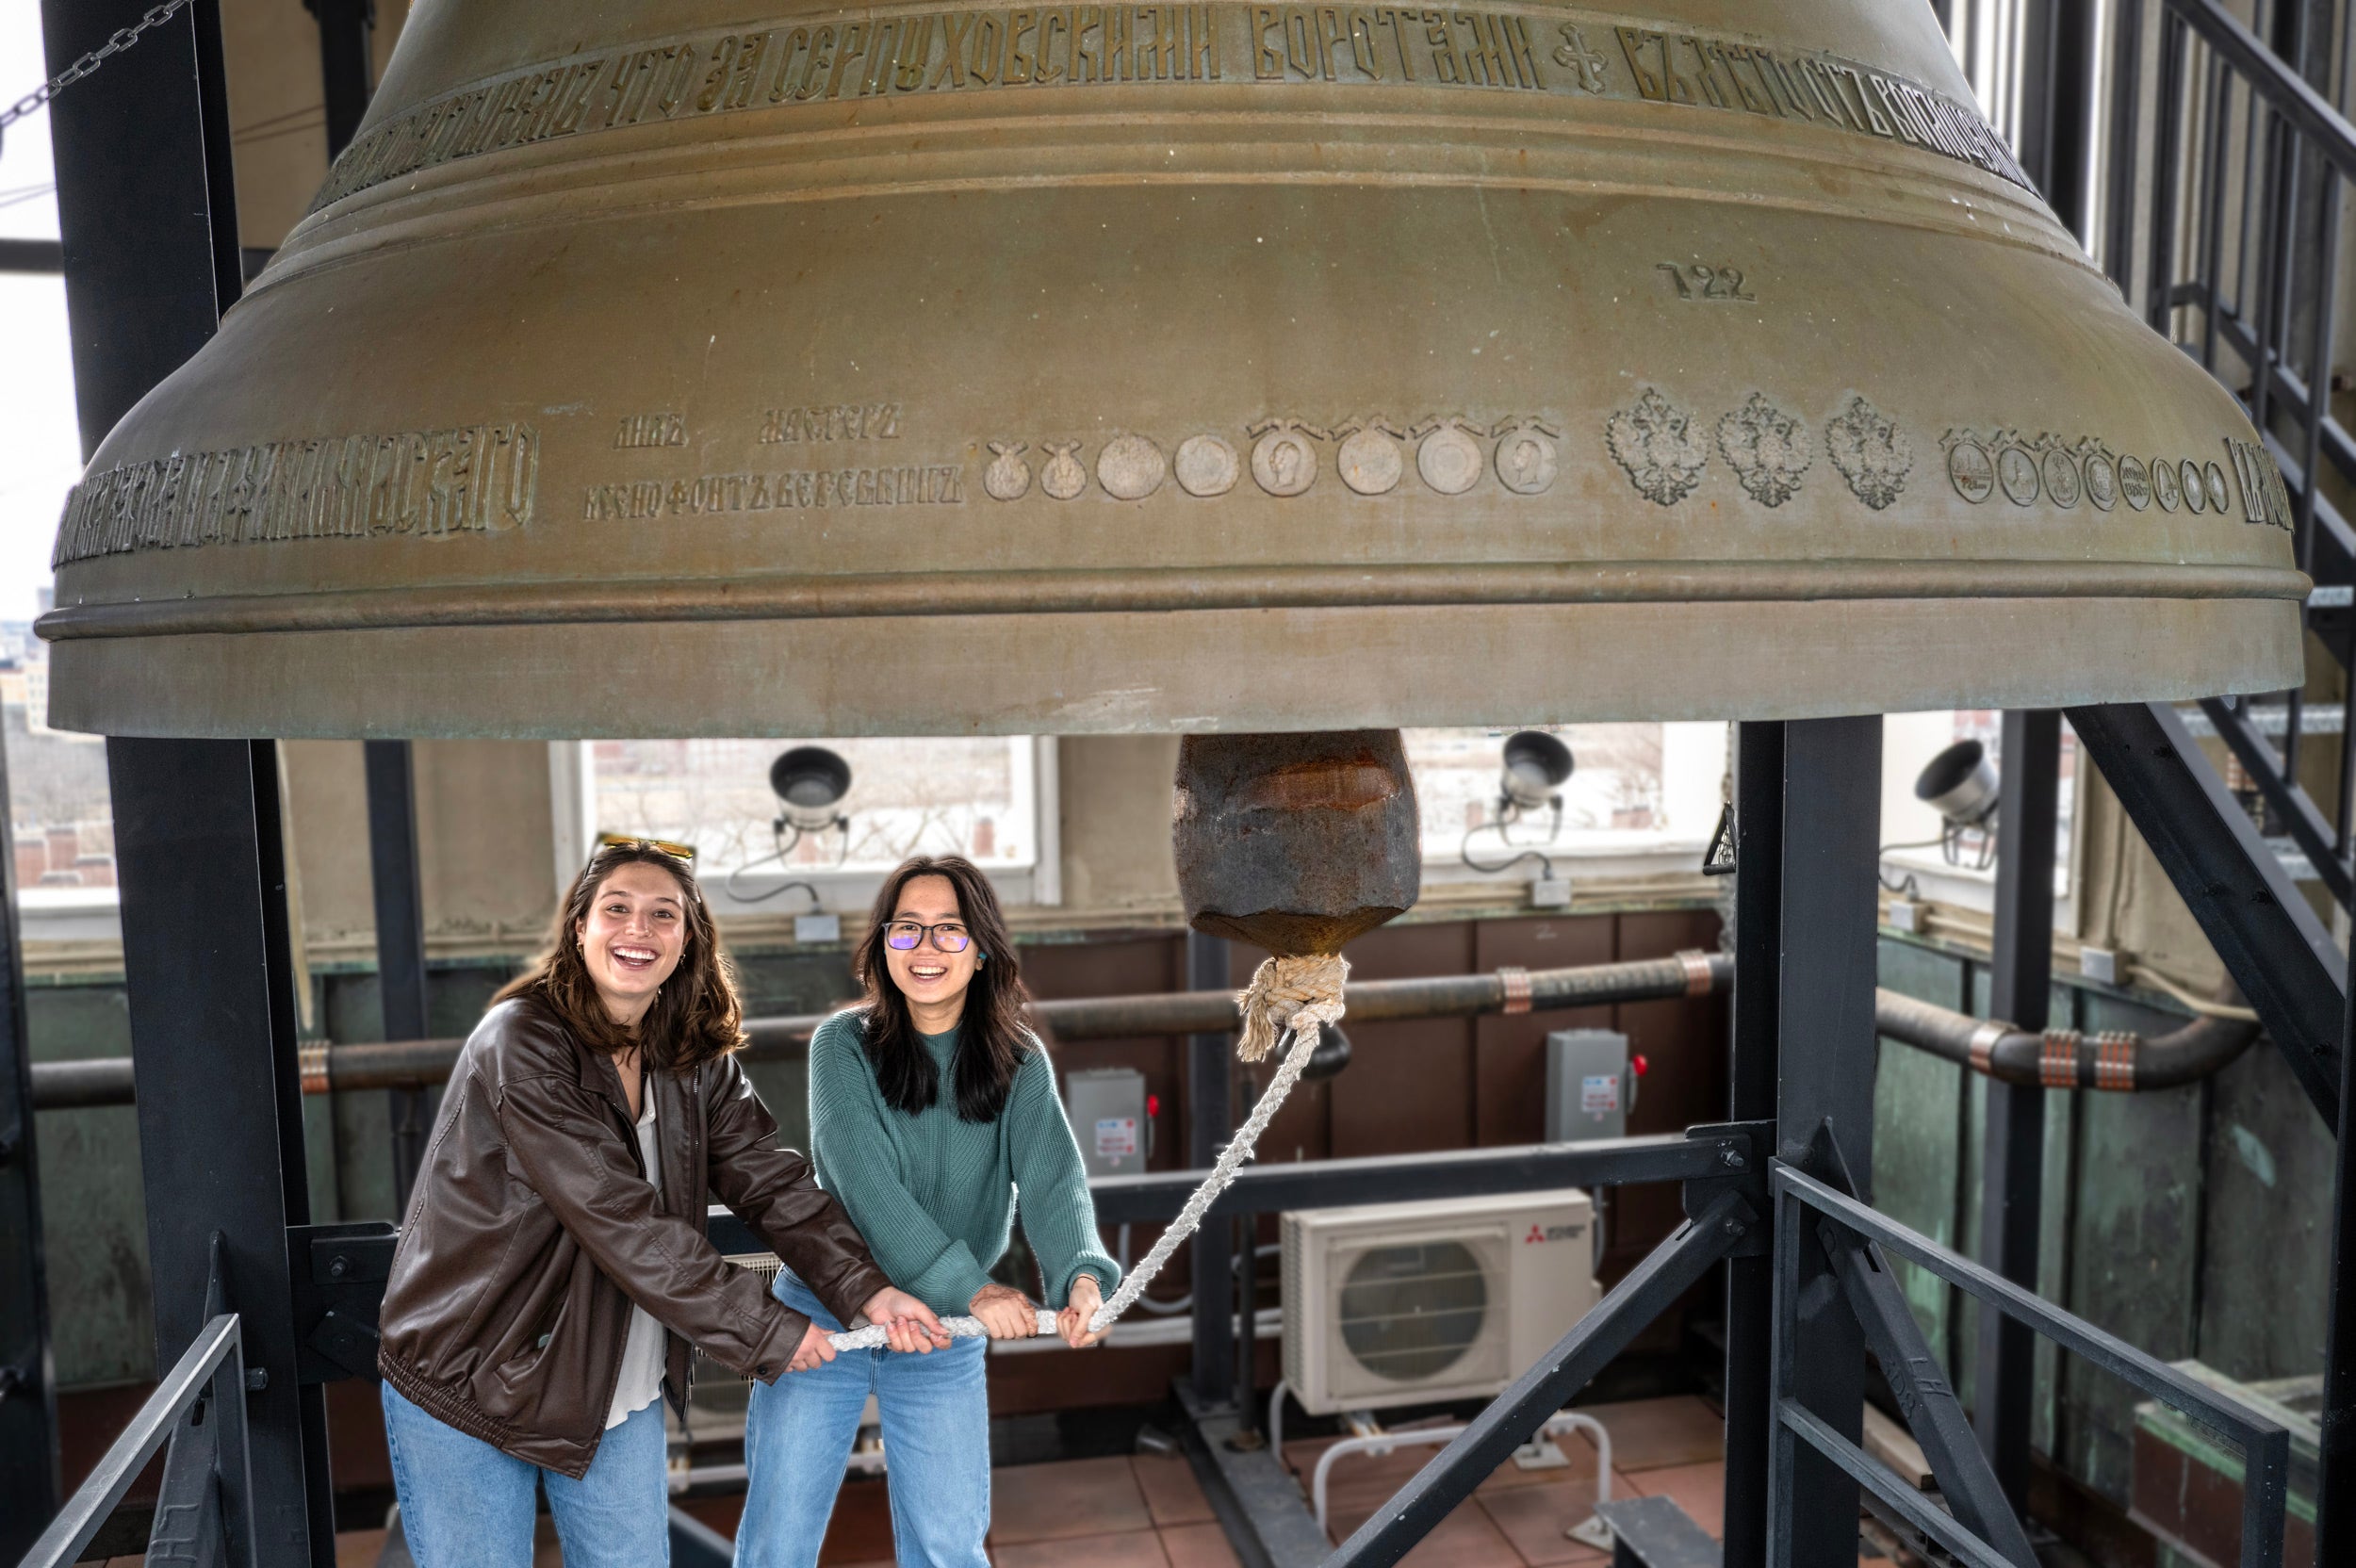 Sofia Giannuzzi (left) and Linh Vu ring a large bell in the Lowell House bell to